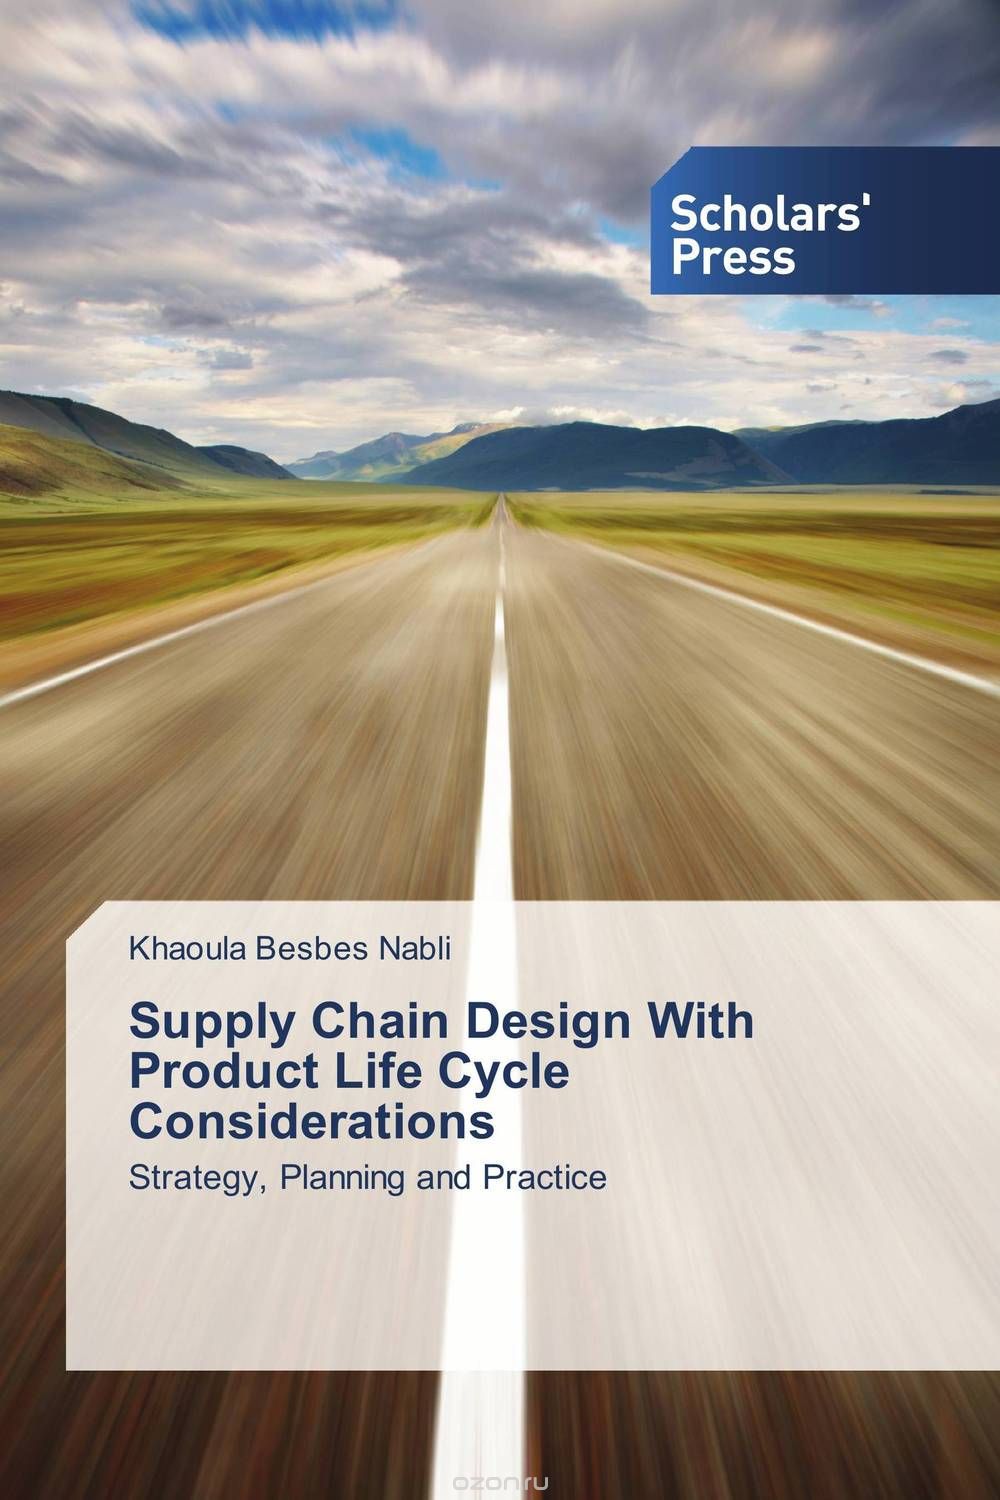 Скачать книгу "Supply Chain Design With Product Life Cycle Considerations"